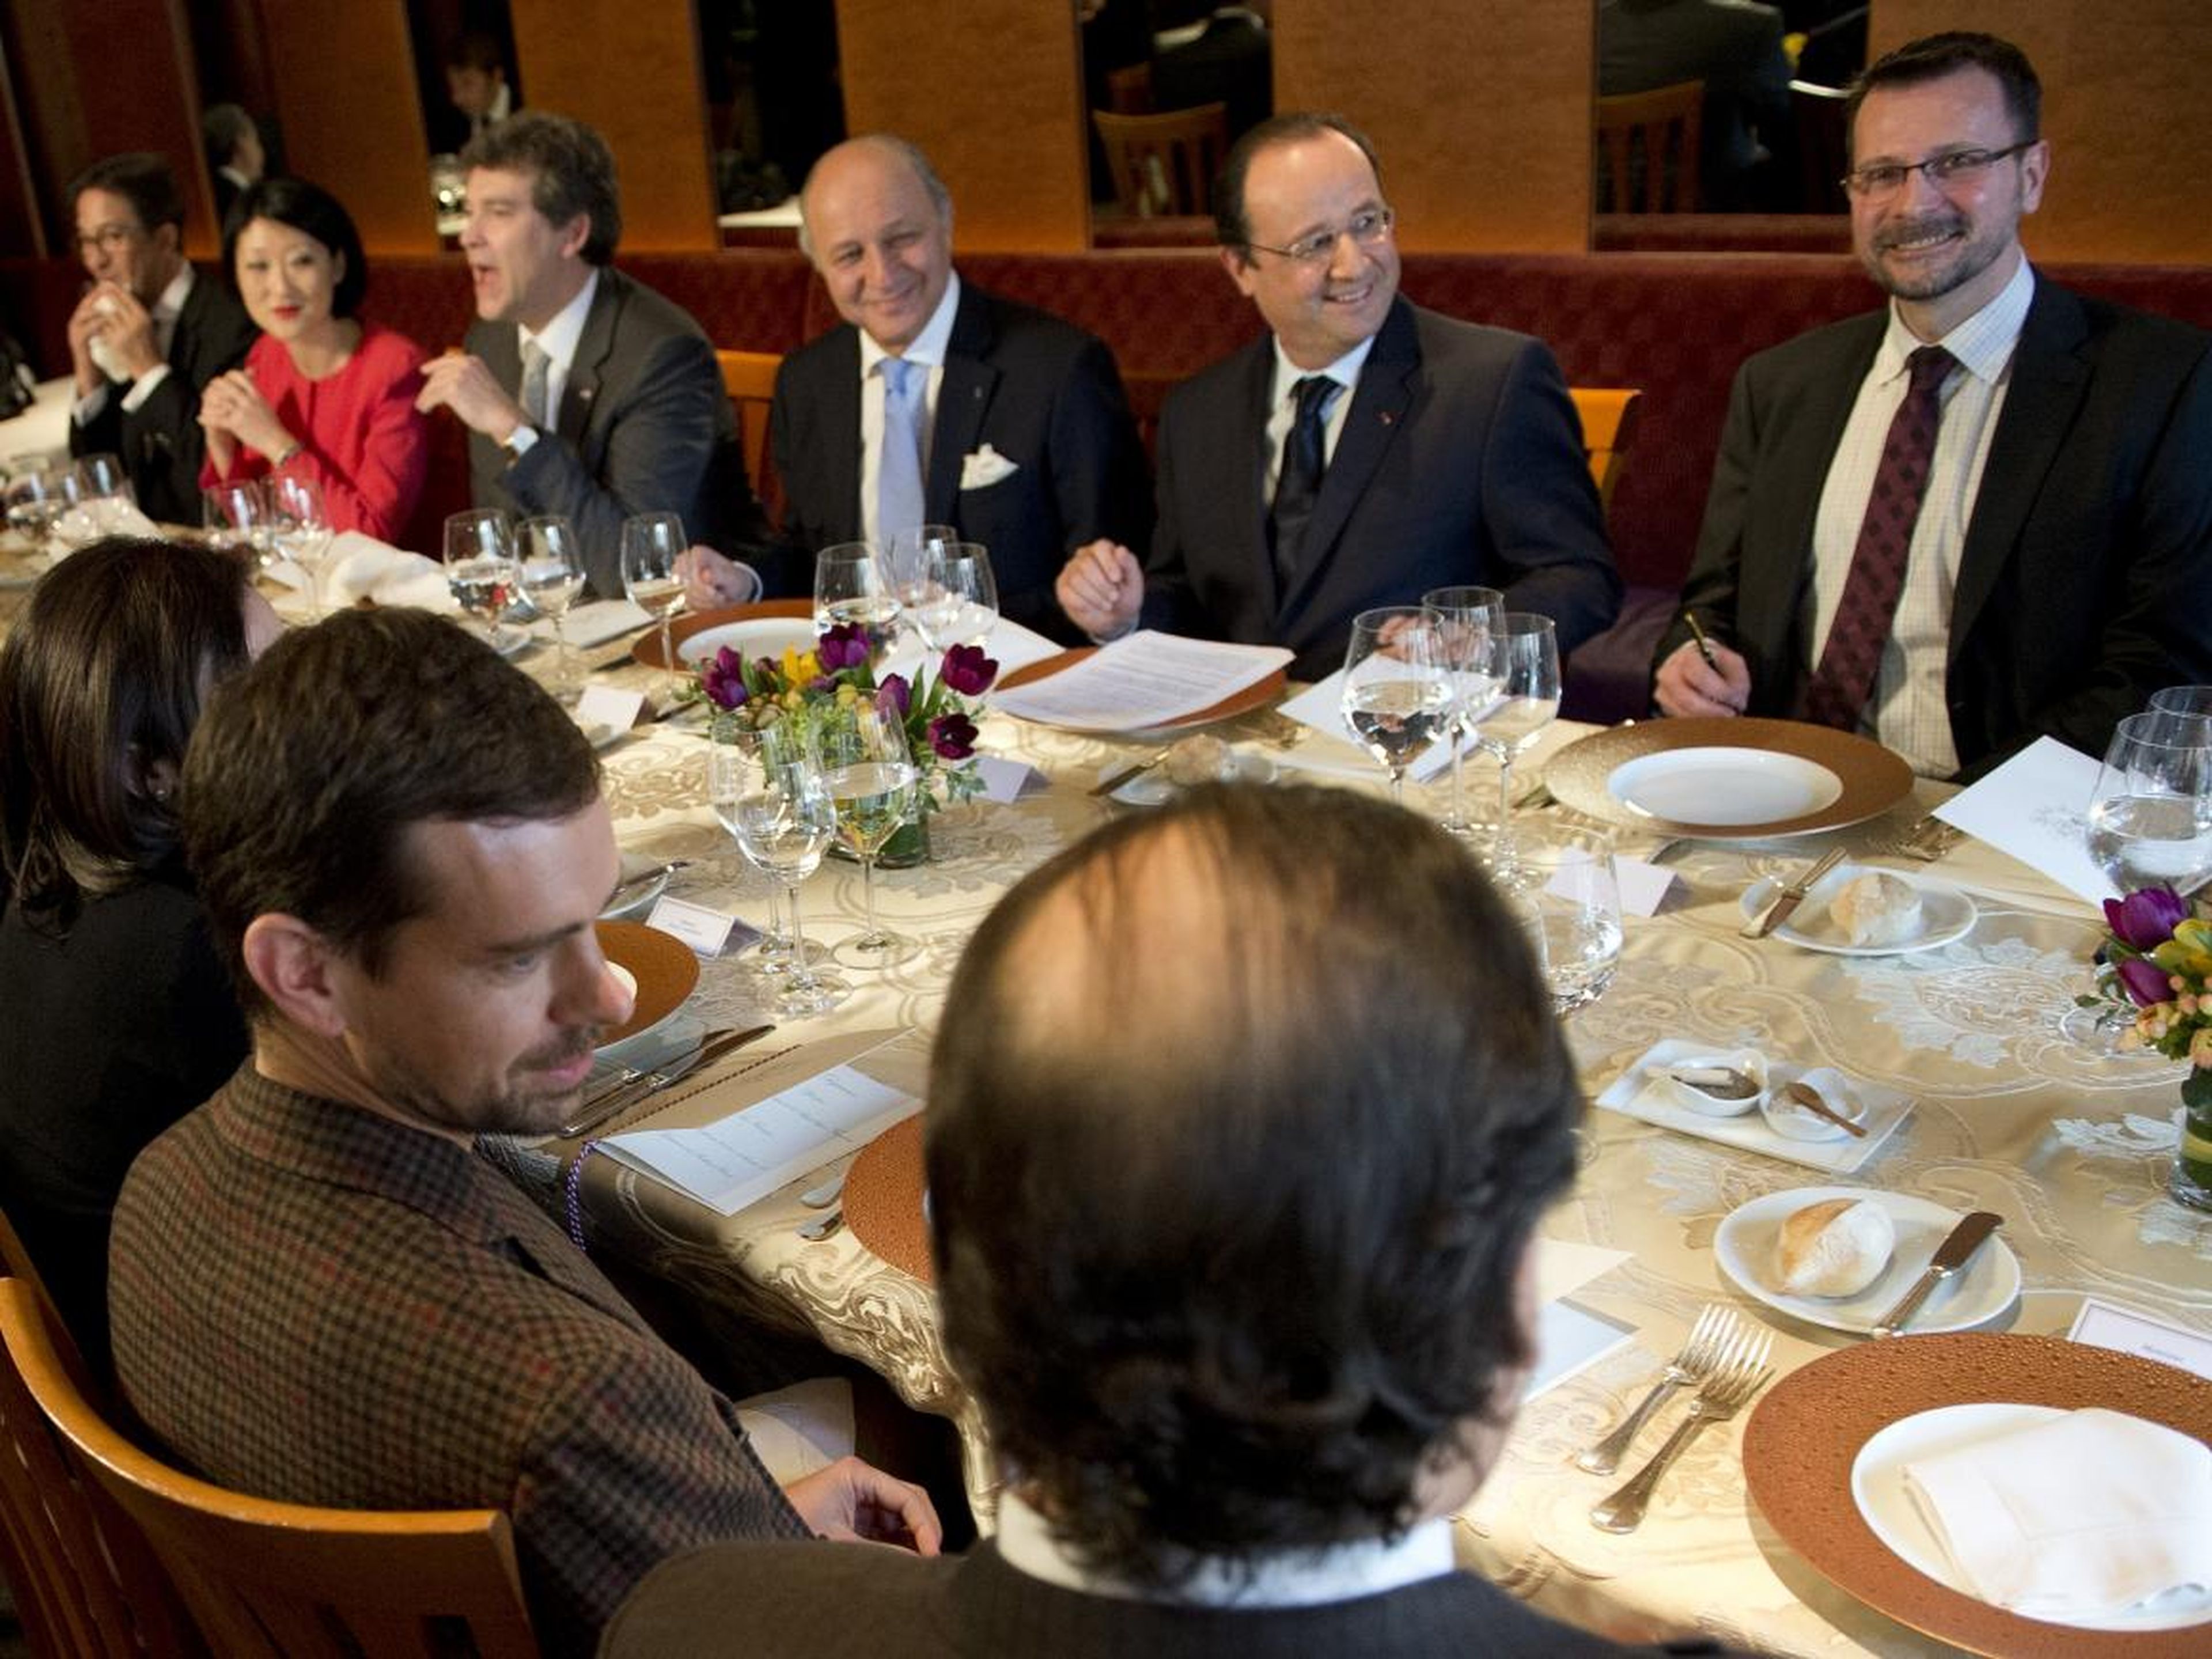 Jack Dorsey at a dinner with former French President Francois Hollande and other businessmen.